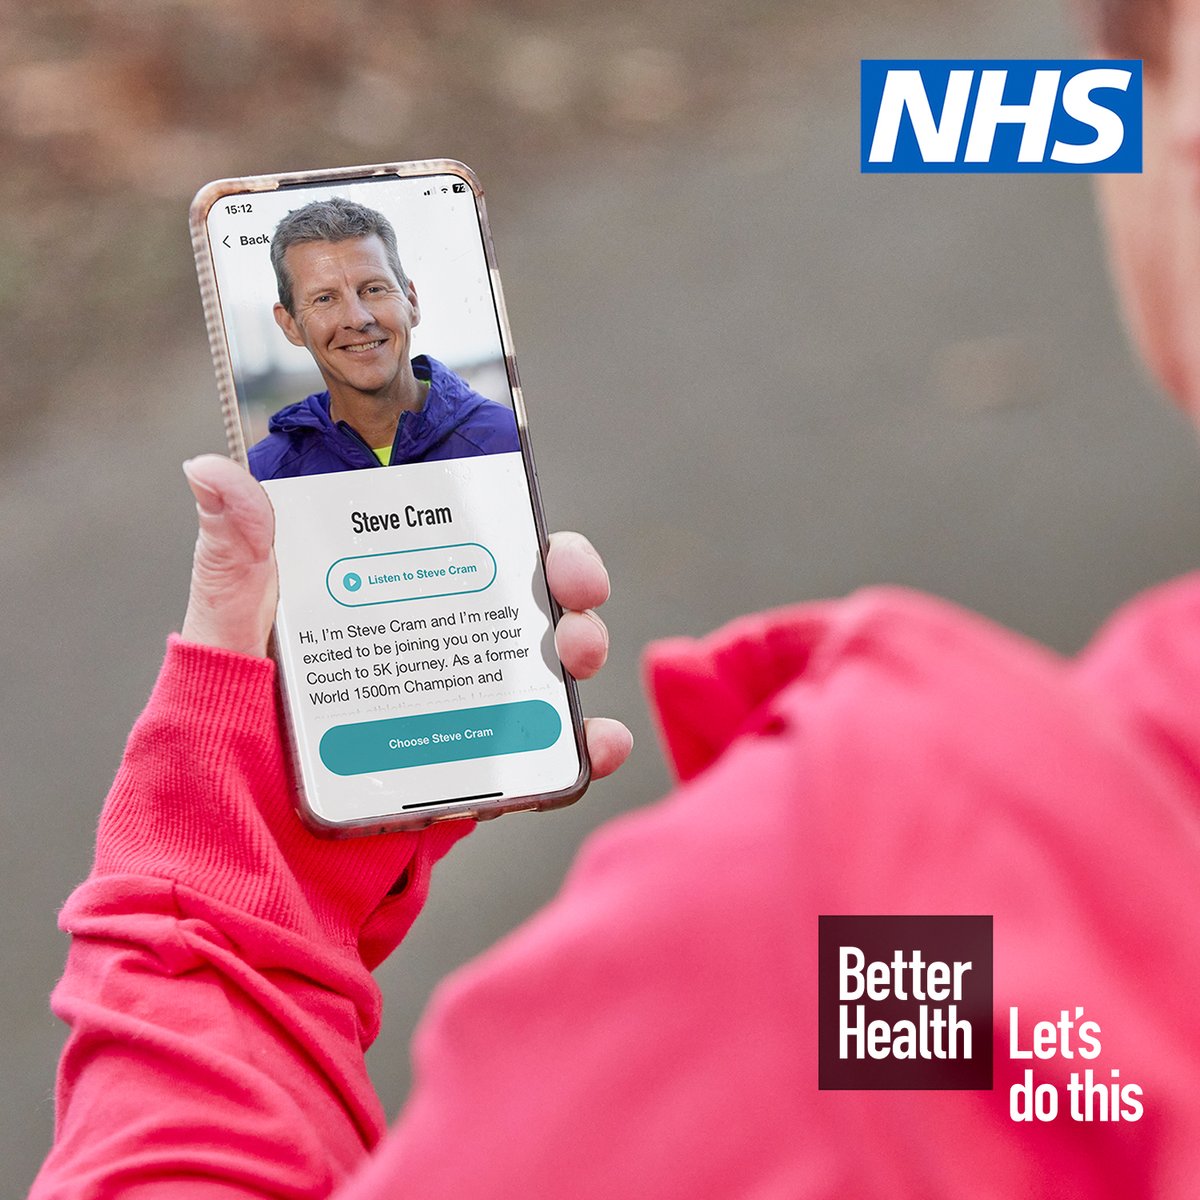 Want to start running but not sure where to begin? Whether you're a beginner or looking to get back into running, Couch to 5K has now helped more than 4 million people start running. Download today: nhs.uk/better-health/…